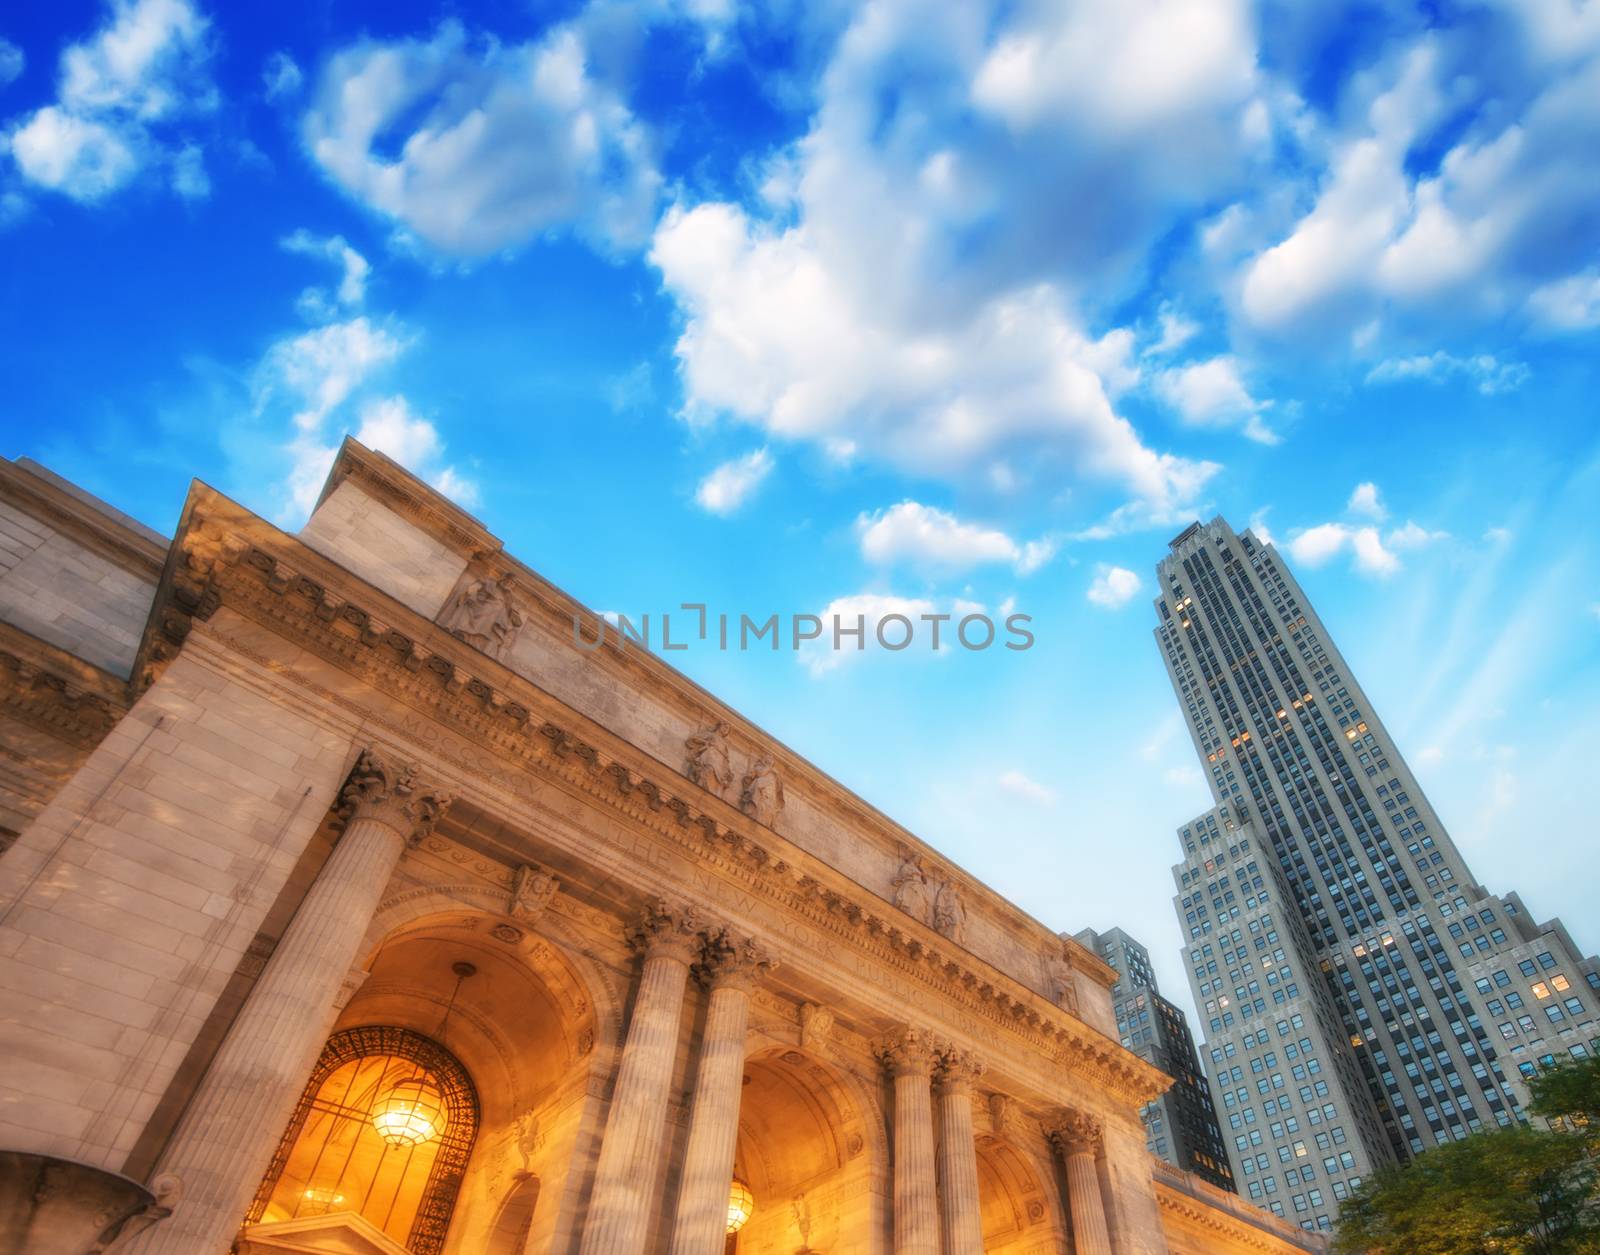 The New York Public Library. Side view with surrounding building by jovannig